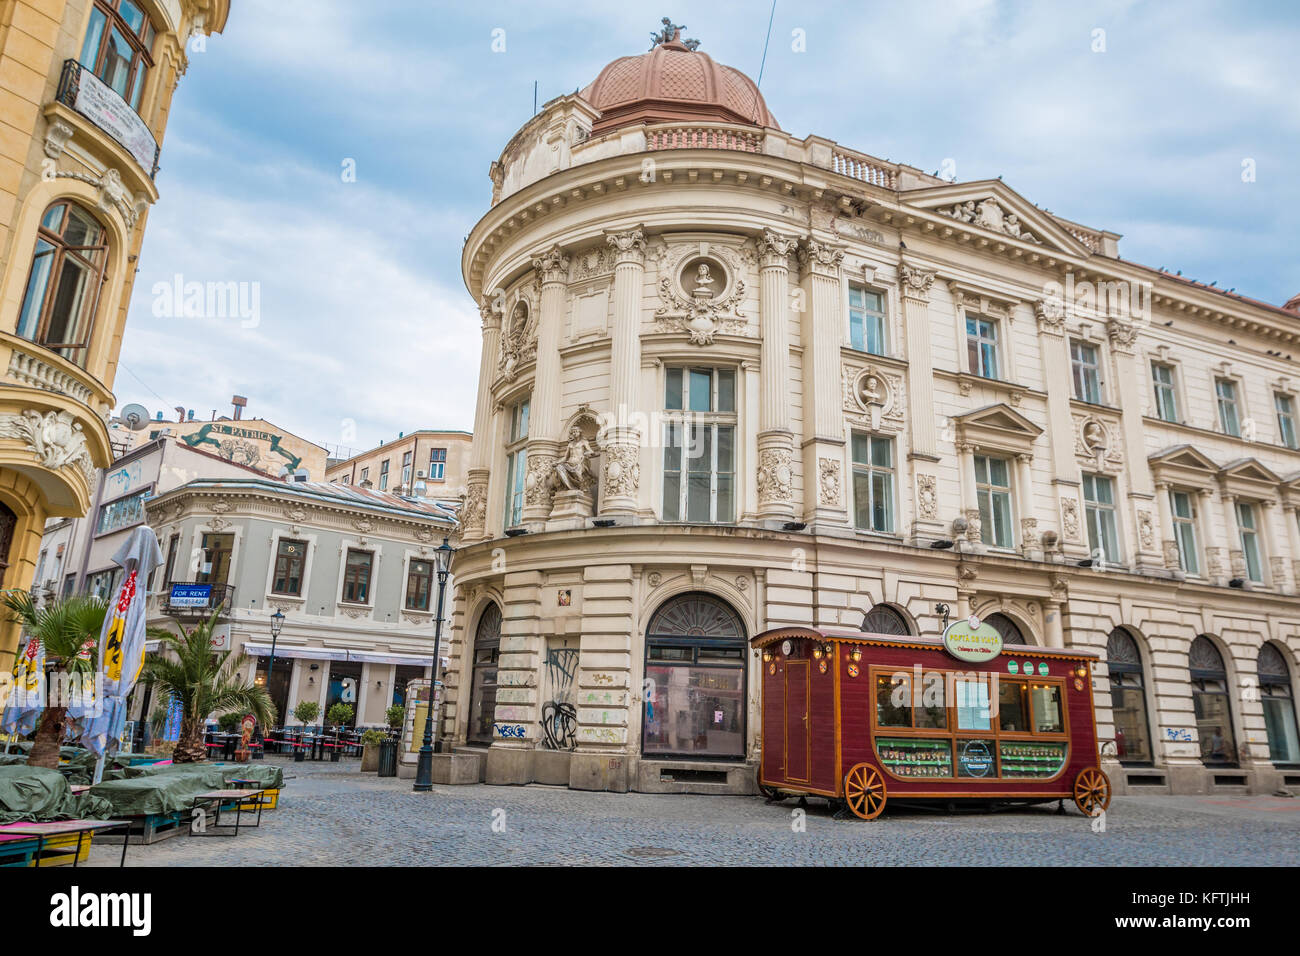 Old city of Bucharest in Romania Stock Photo